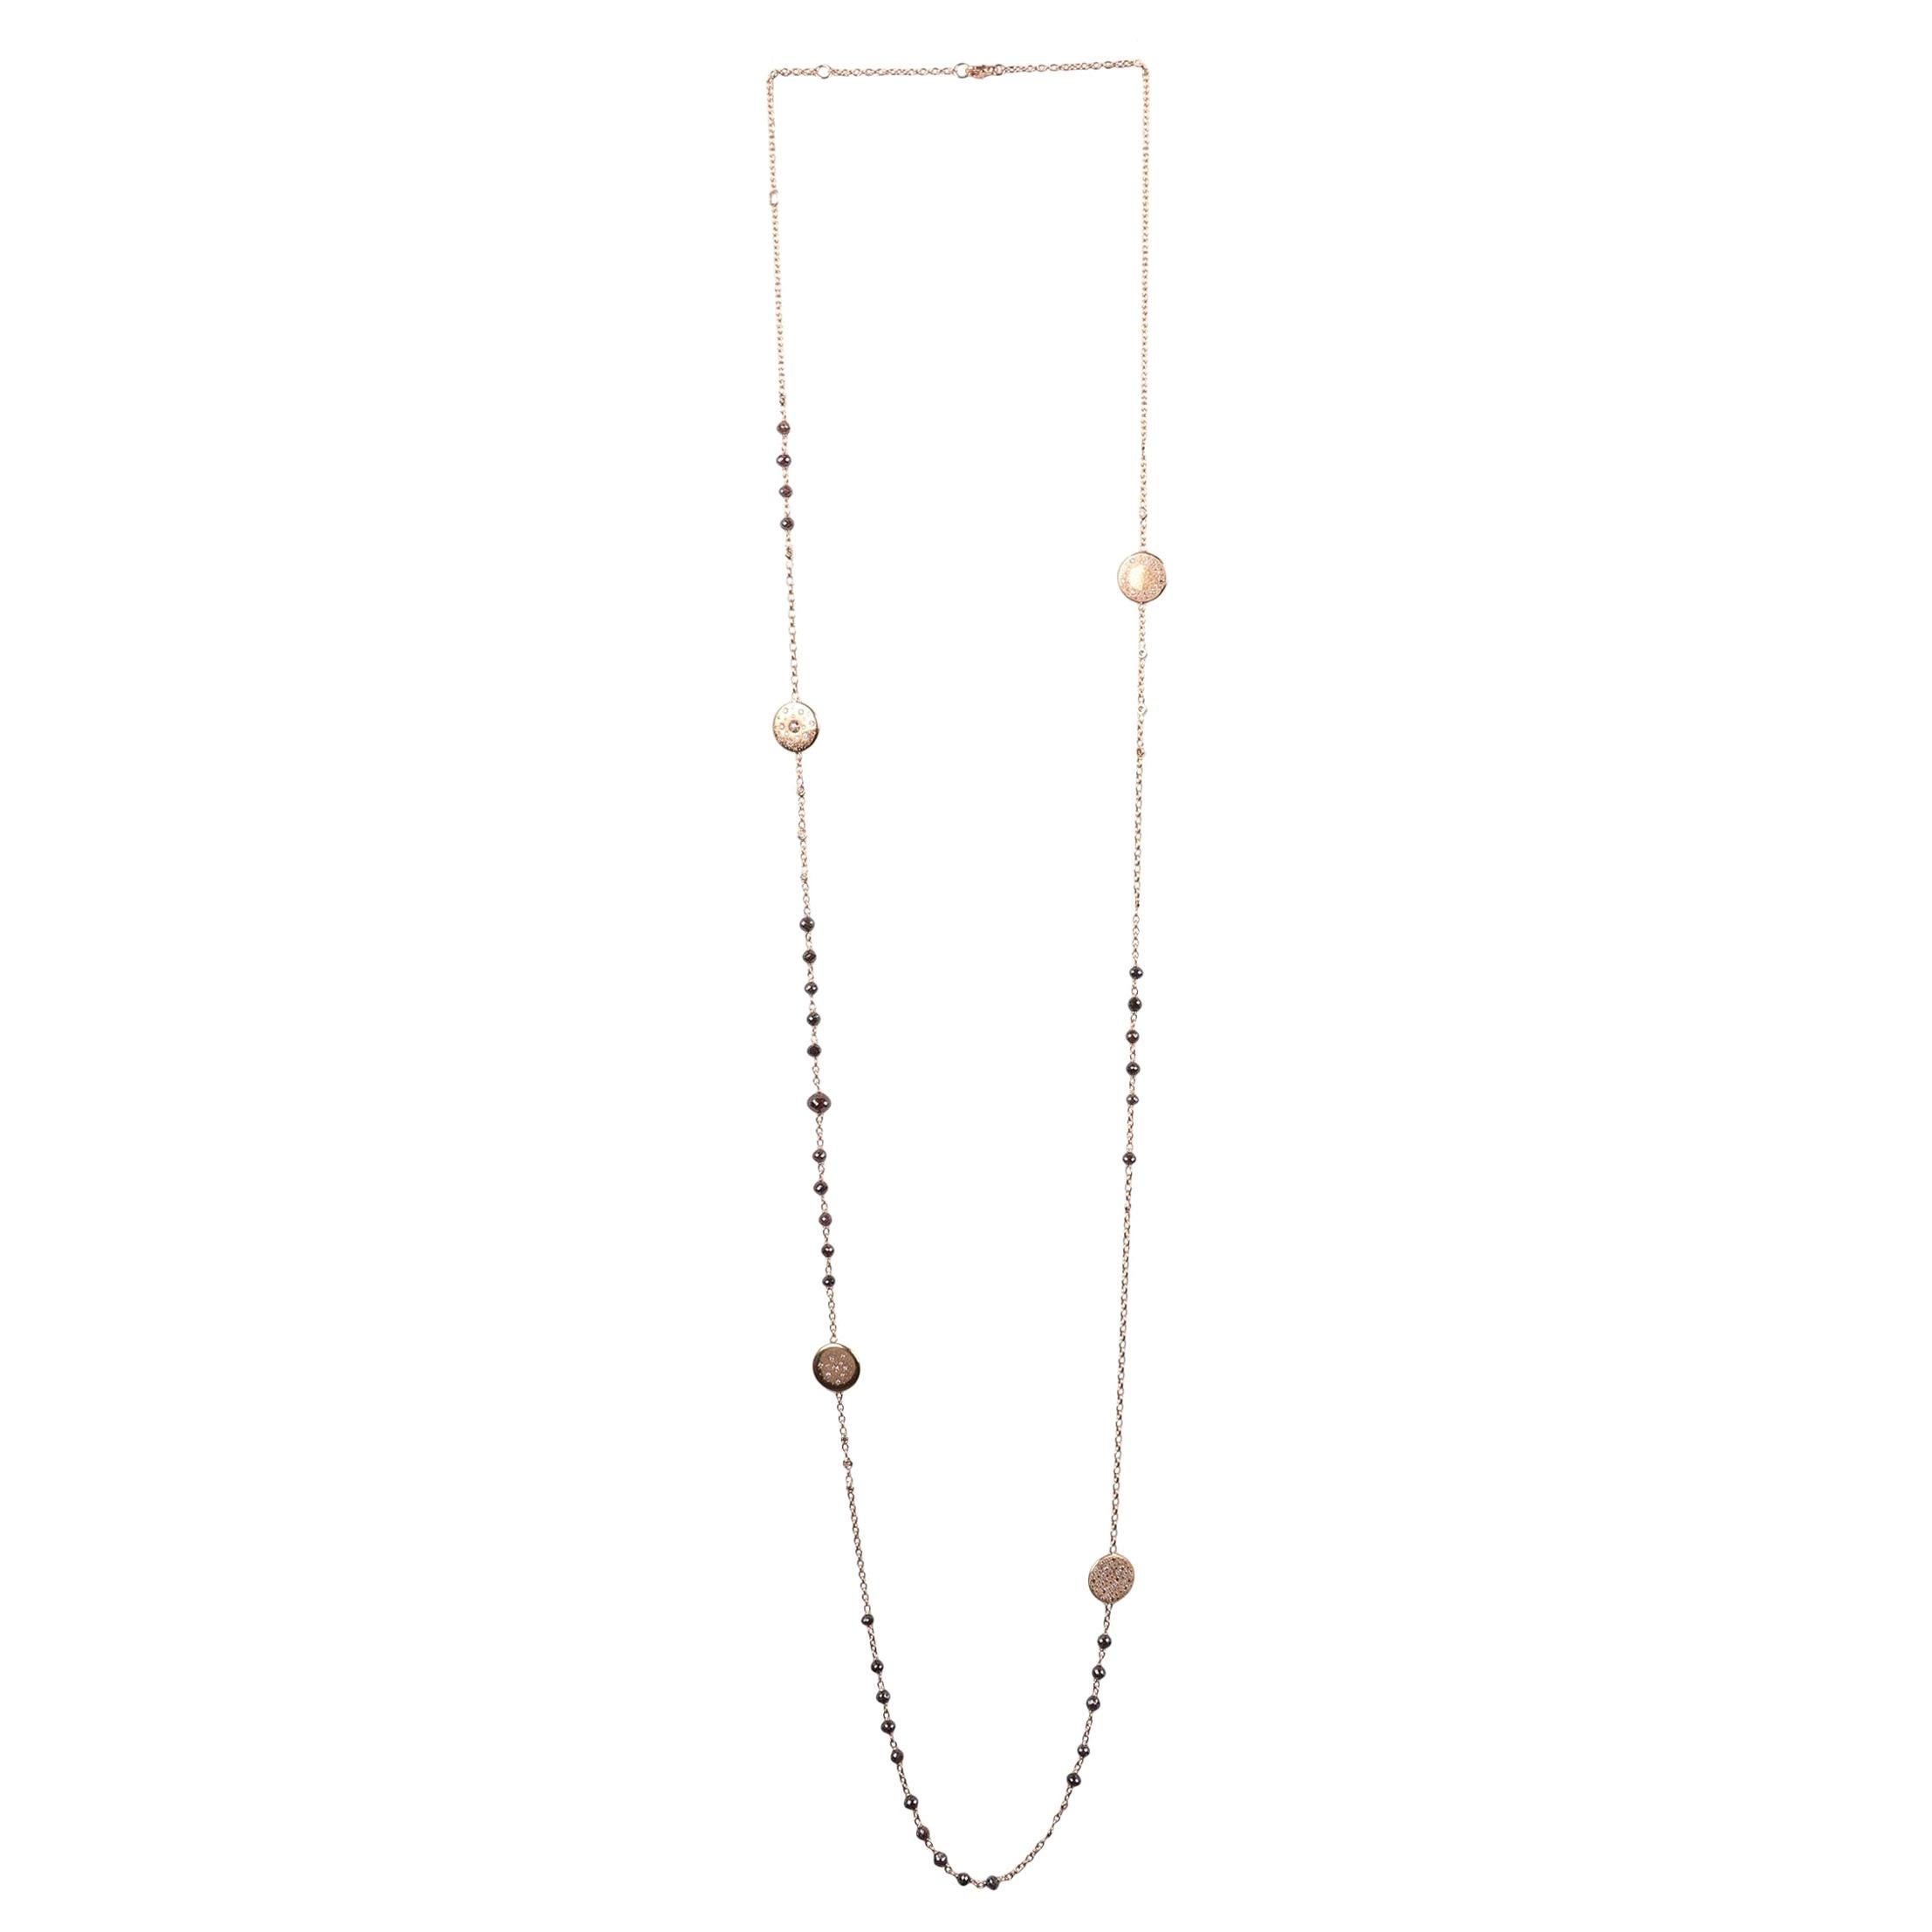 0.33 White GVS 33.46 Round, Bead, Rose Cut Brown Pink Gold Long Chain Necklace For Sale